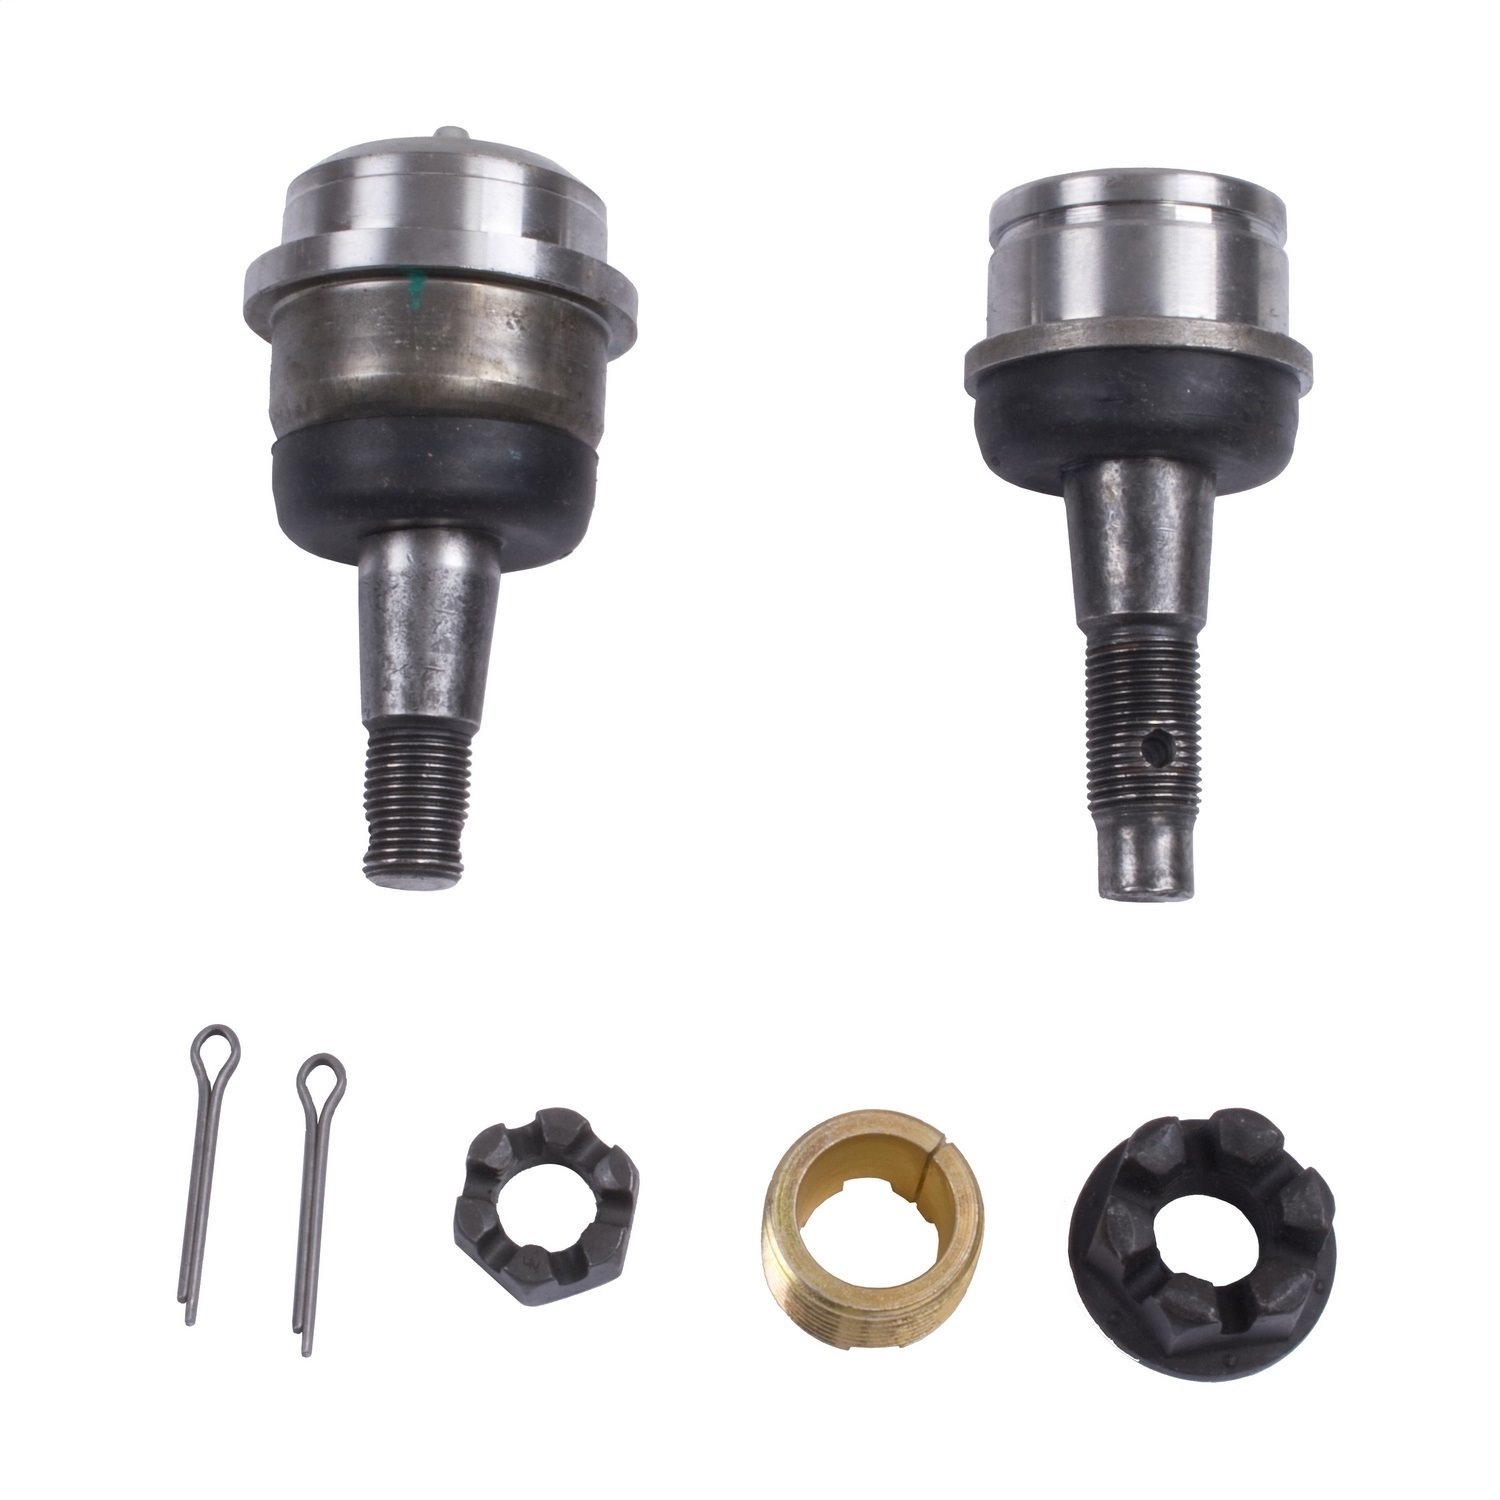 This Ball Joint kit fits 99-04 Jeep Grand